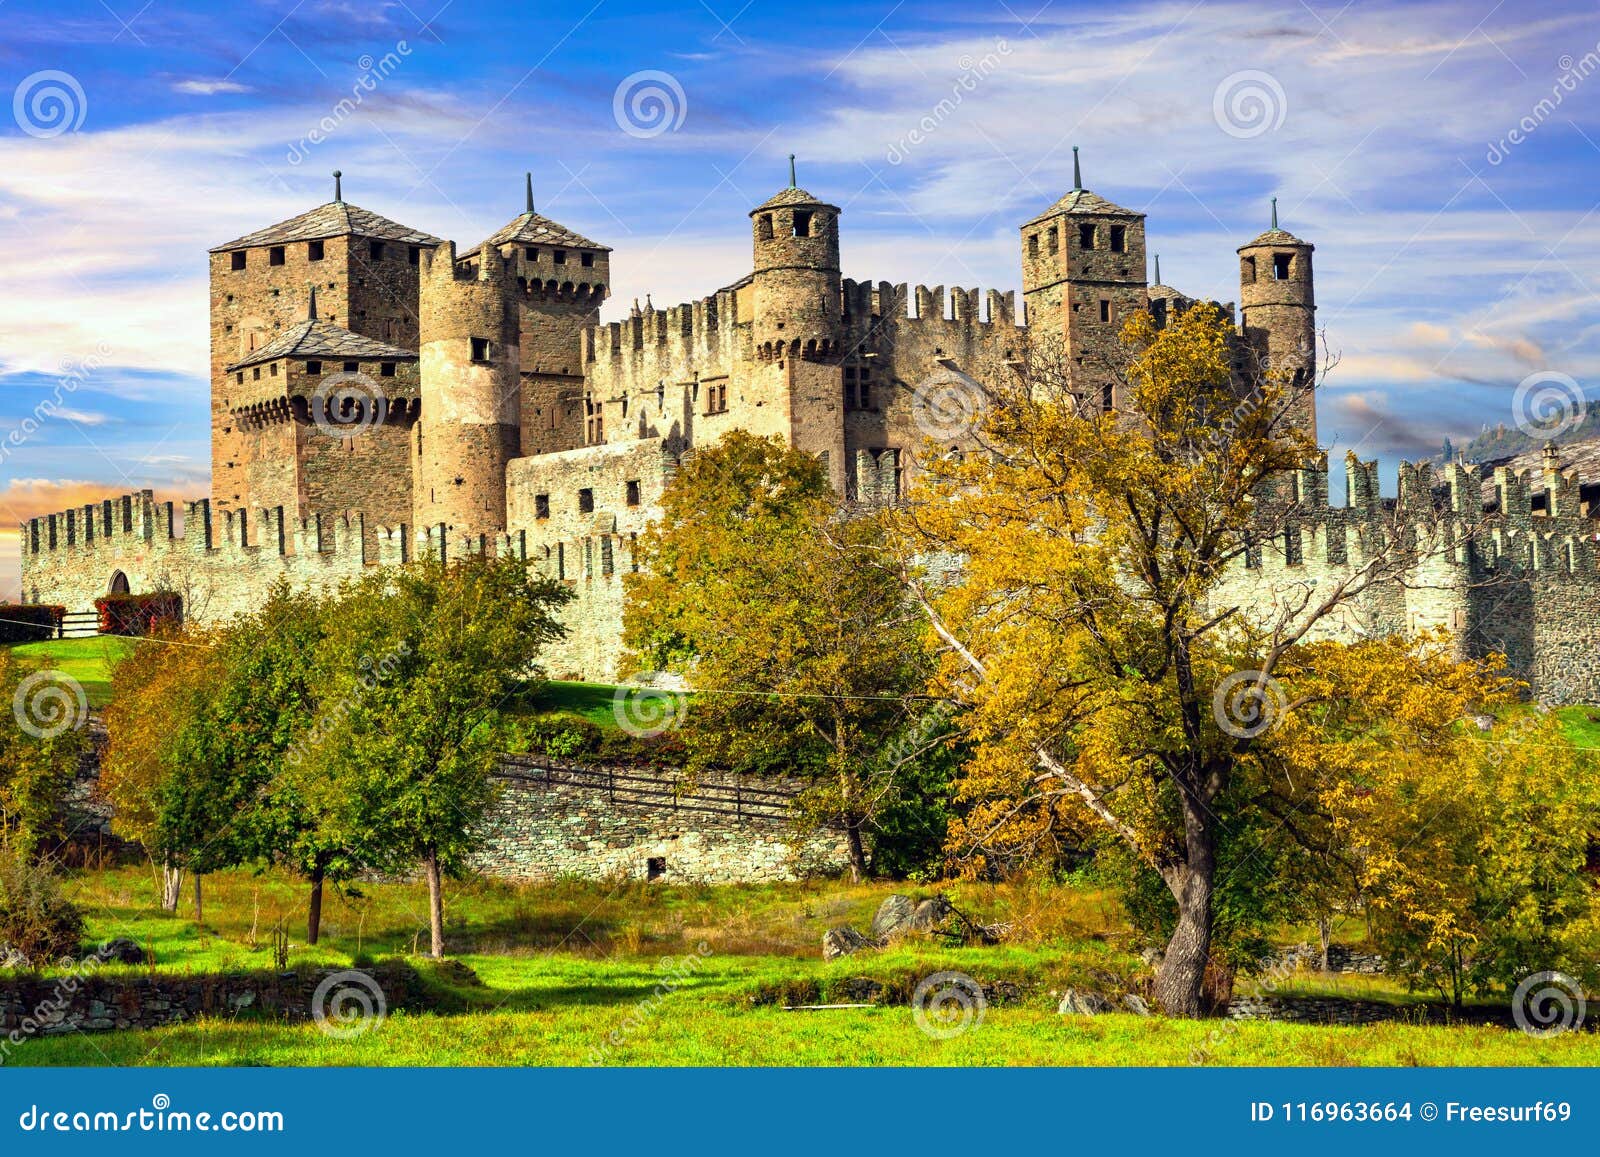 medieval castles of italy - castello di fenis in valle d`aosta